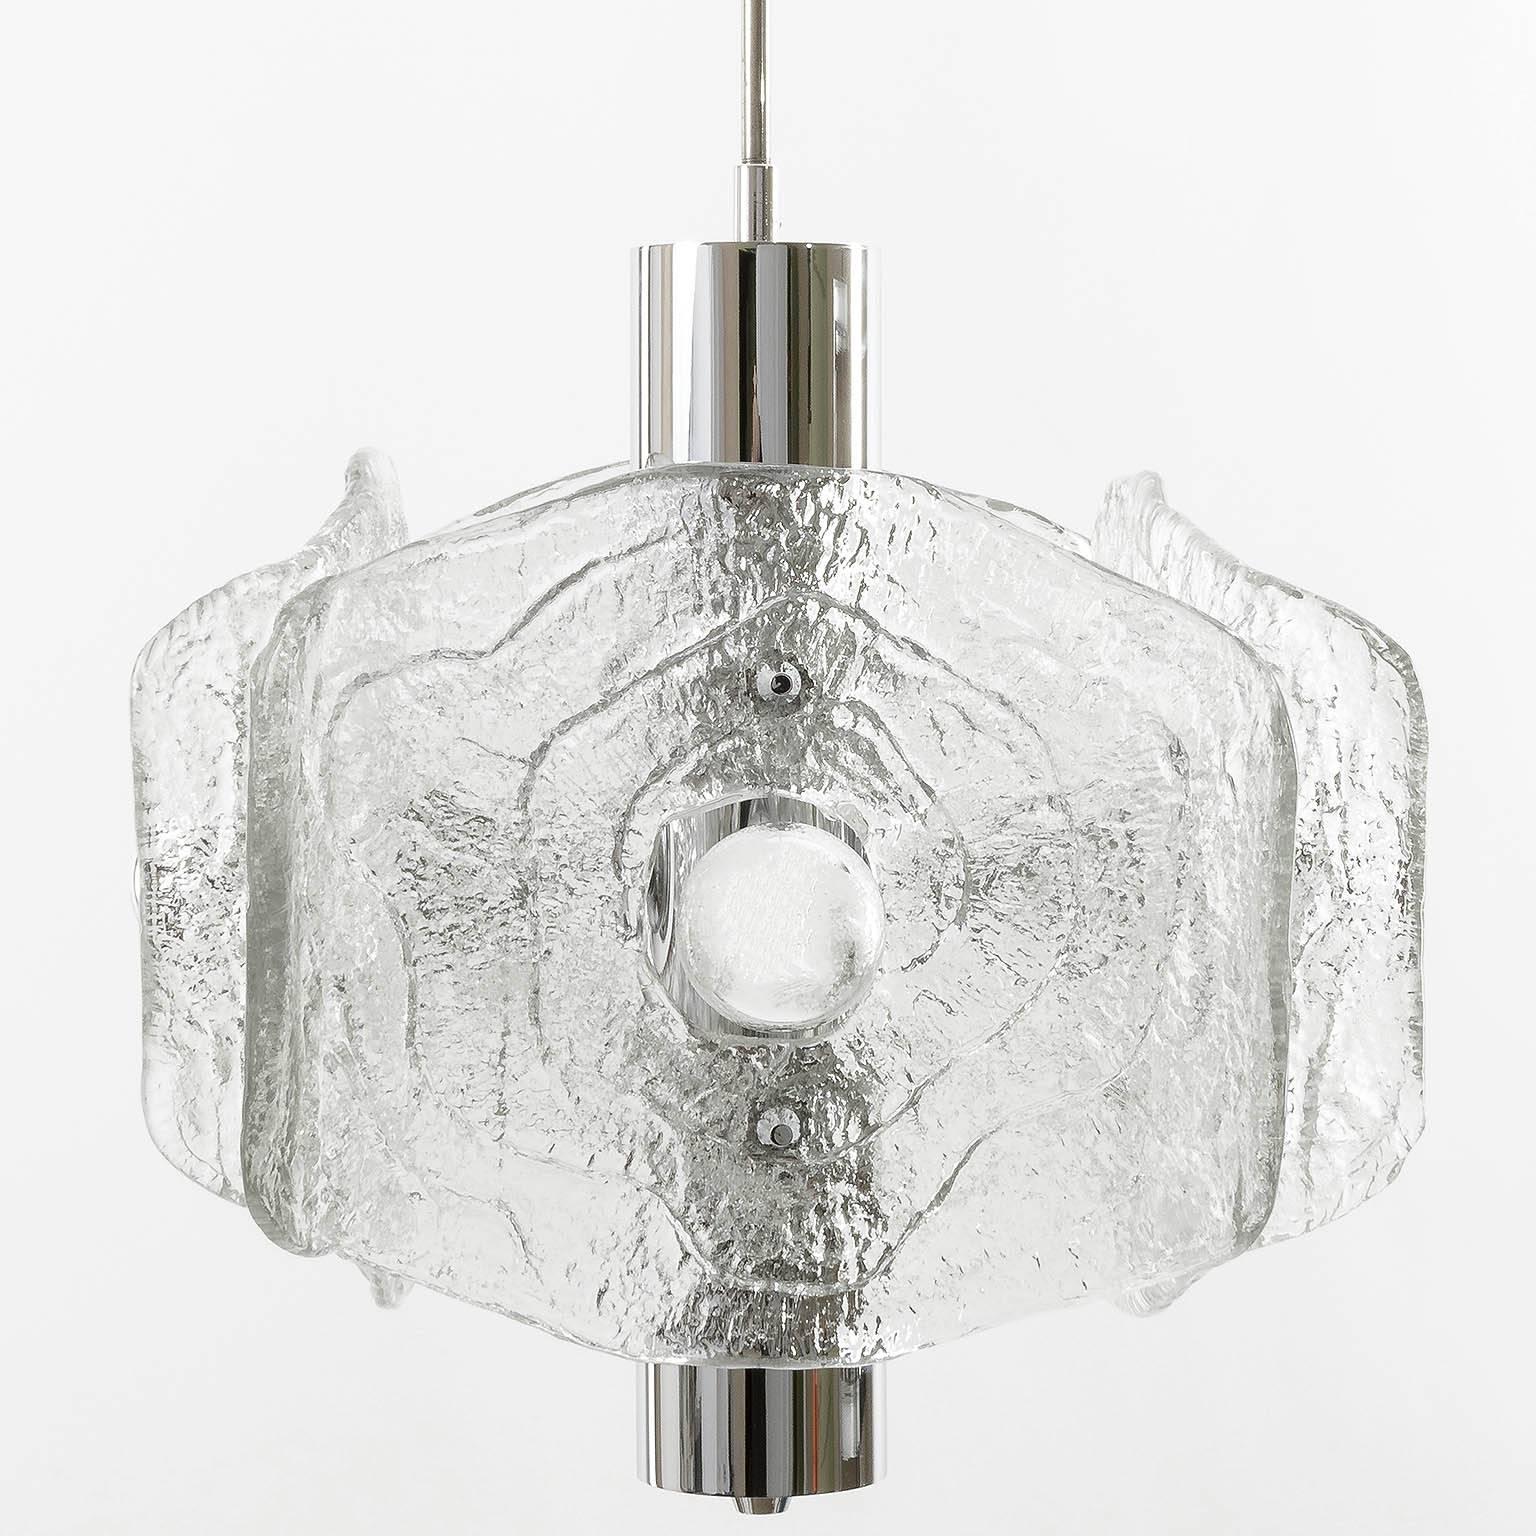 Austrian Mid-Century Modern Chandelier, Chrome and Murano Glass, 1970s For Sale